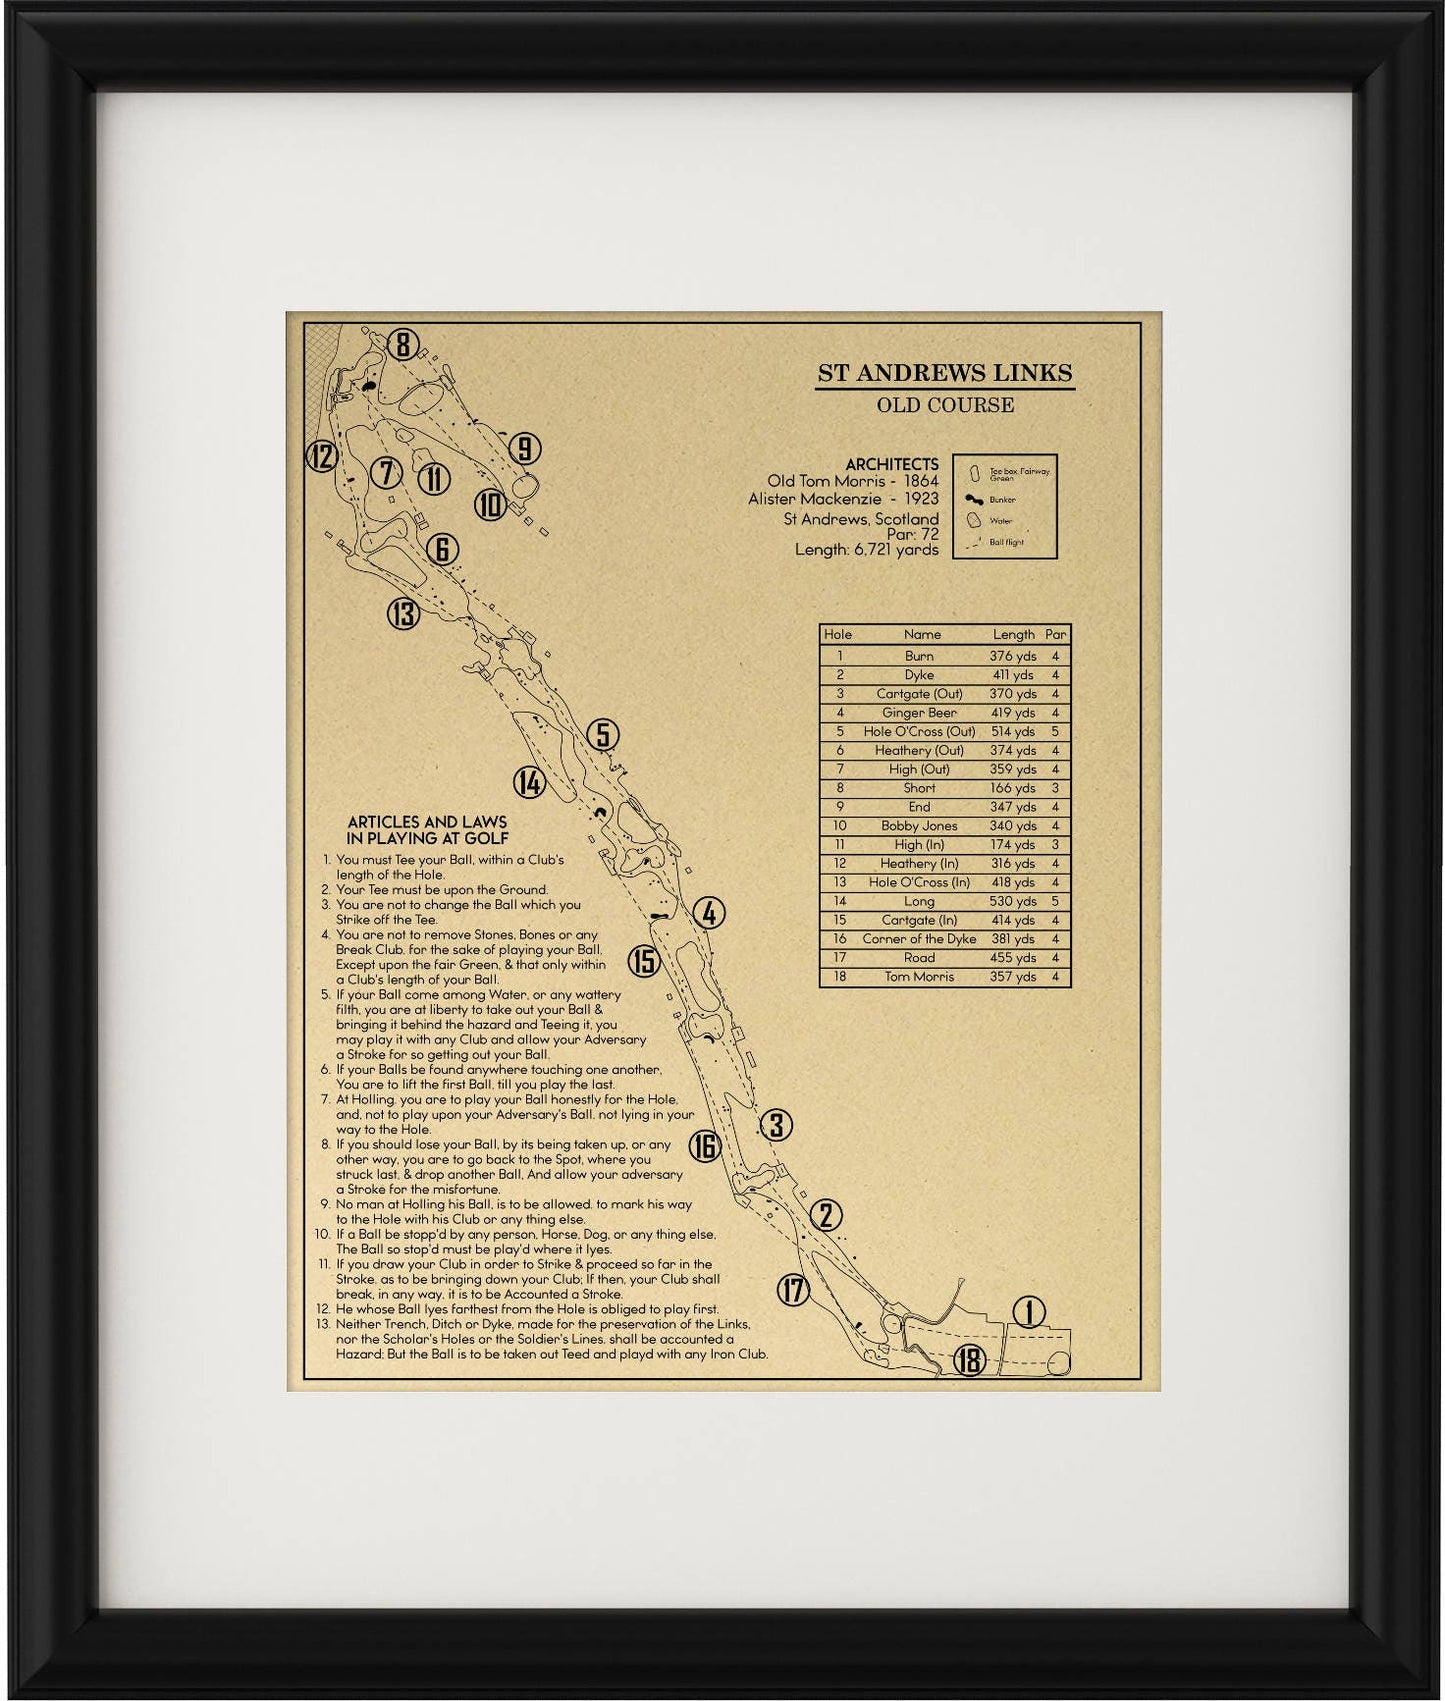 The Old Course with the Original 13 Rules of Golf Outline (Print)